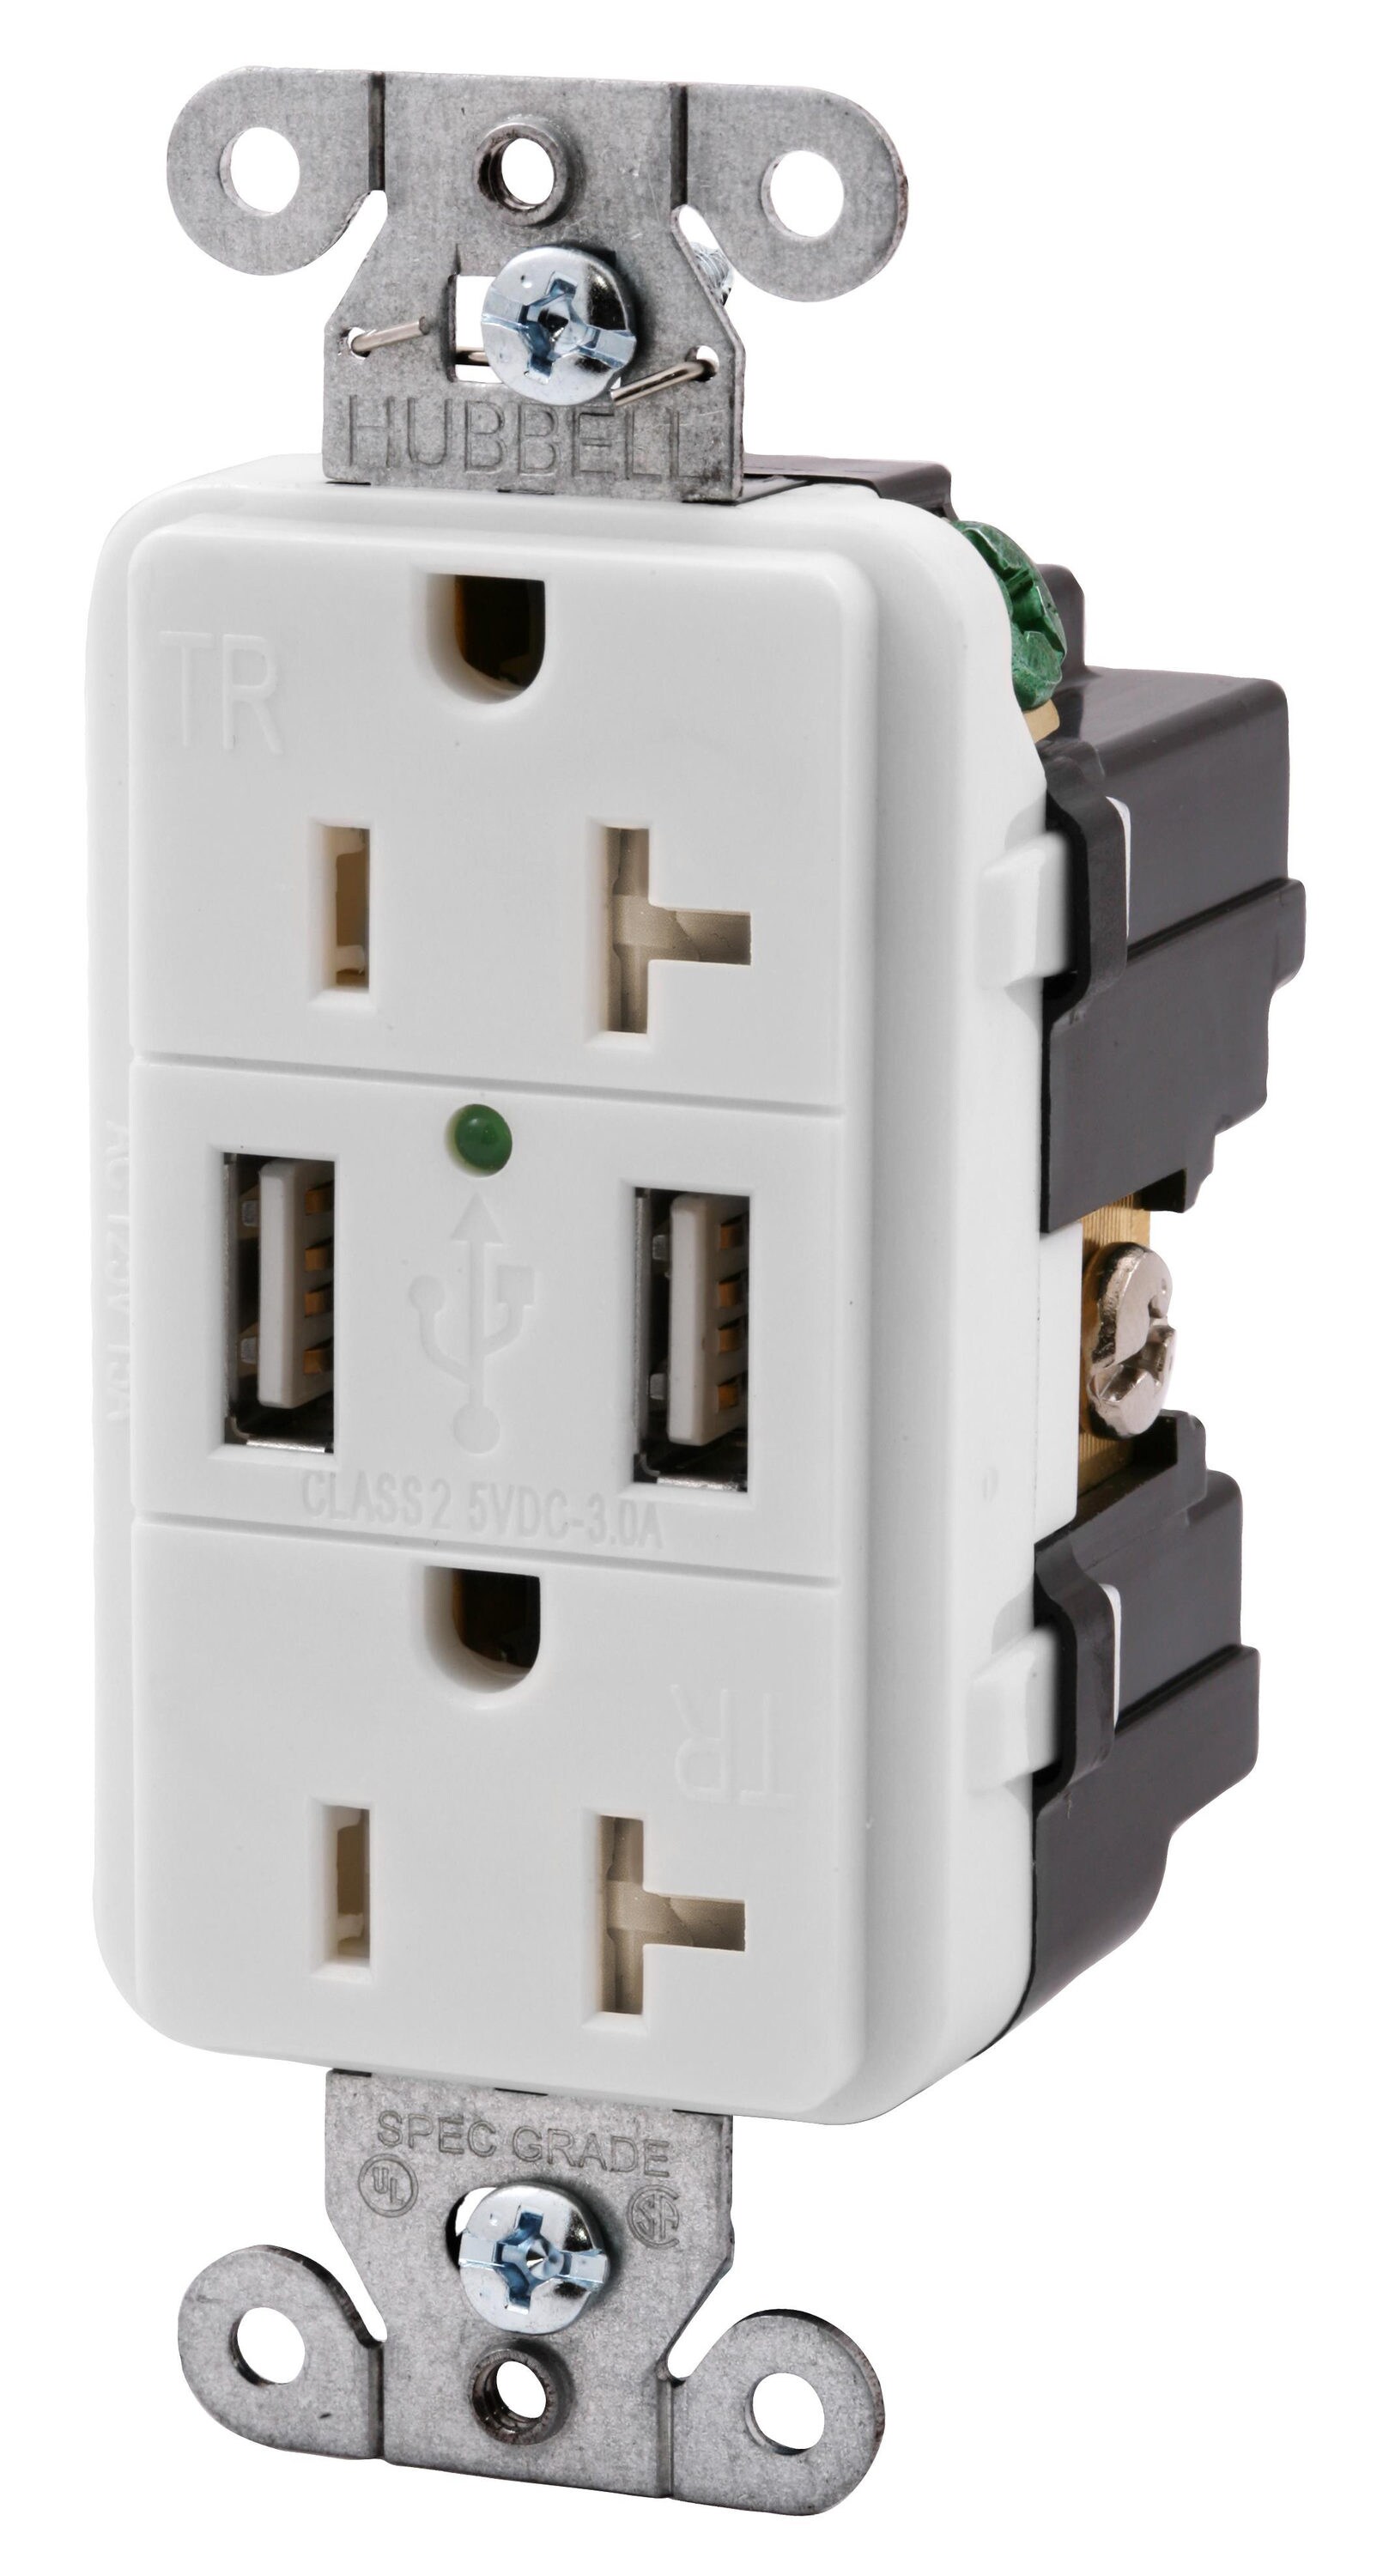 Hubbell 20 Amp USB Receptacle USB20AW 